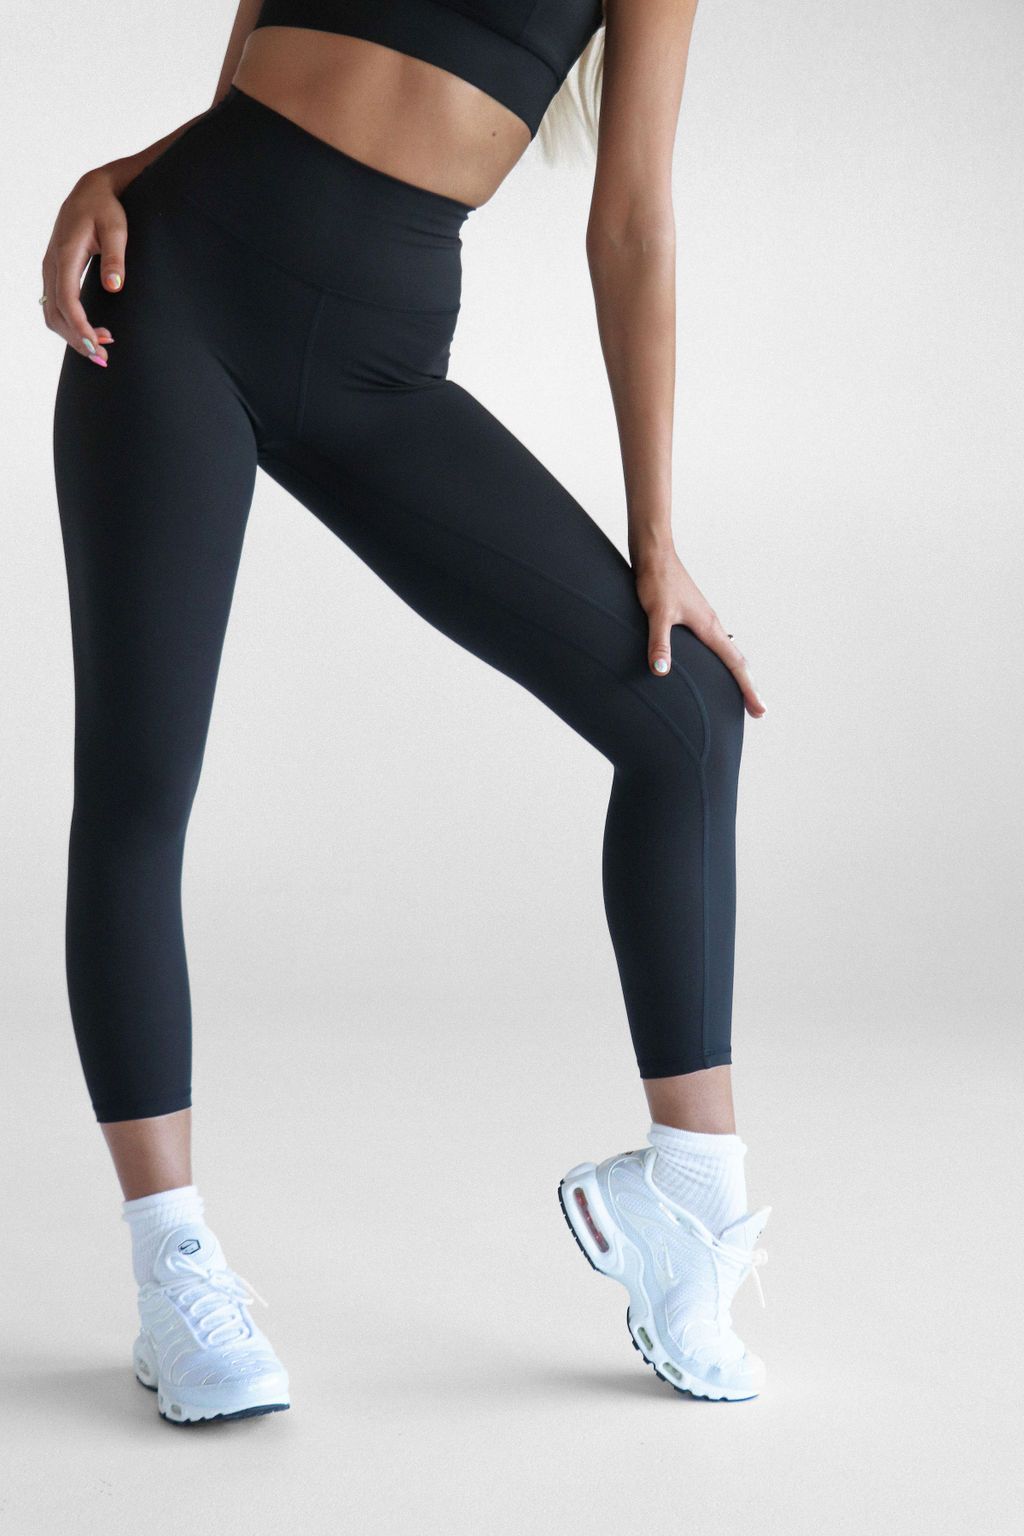 Athletic Works Workout Leggings Black - $8 - From Lilian